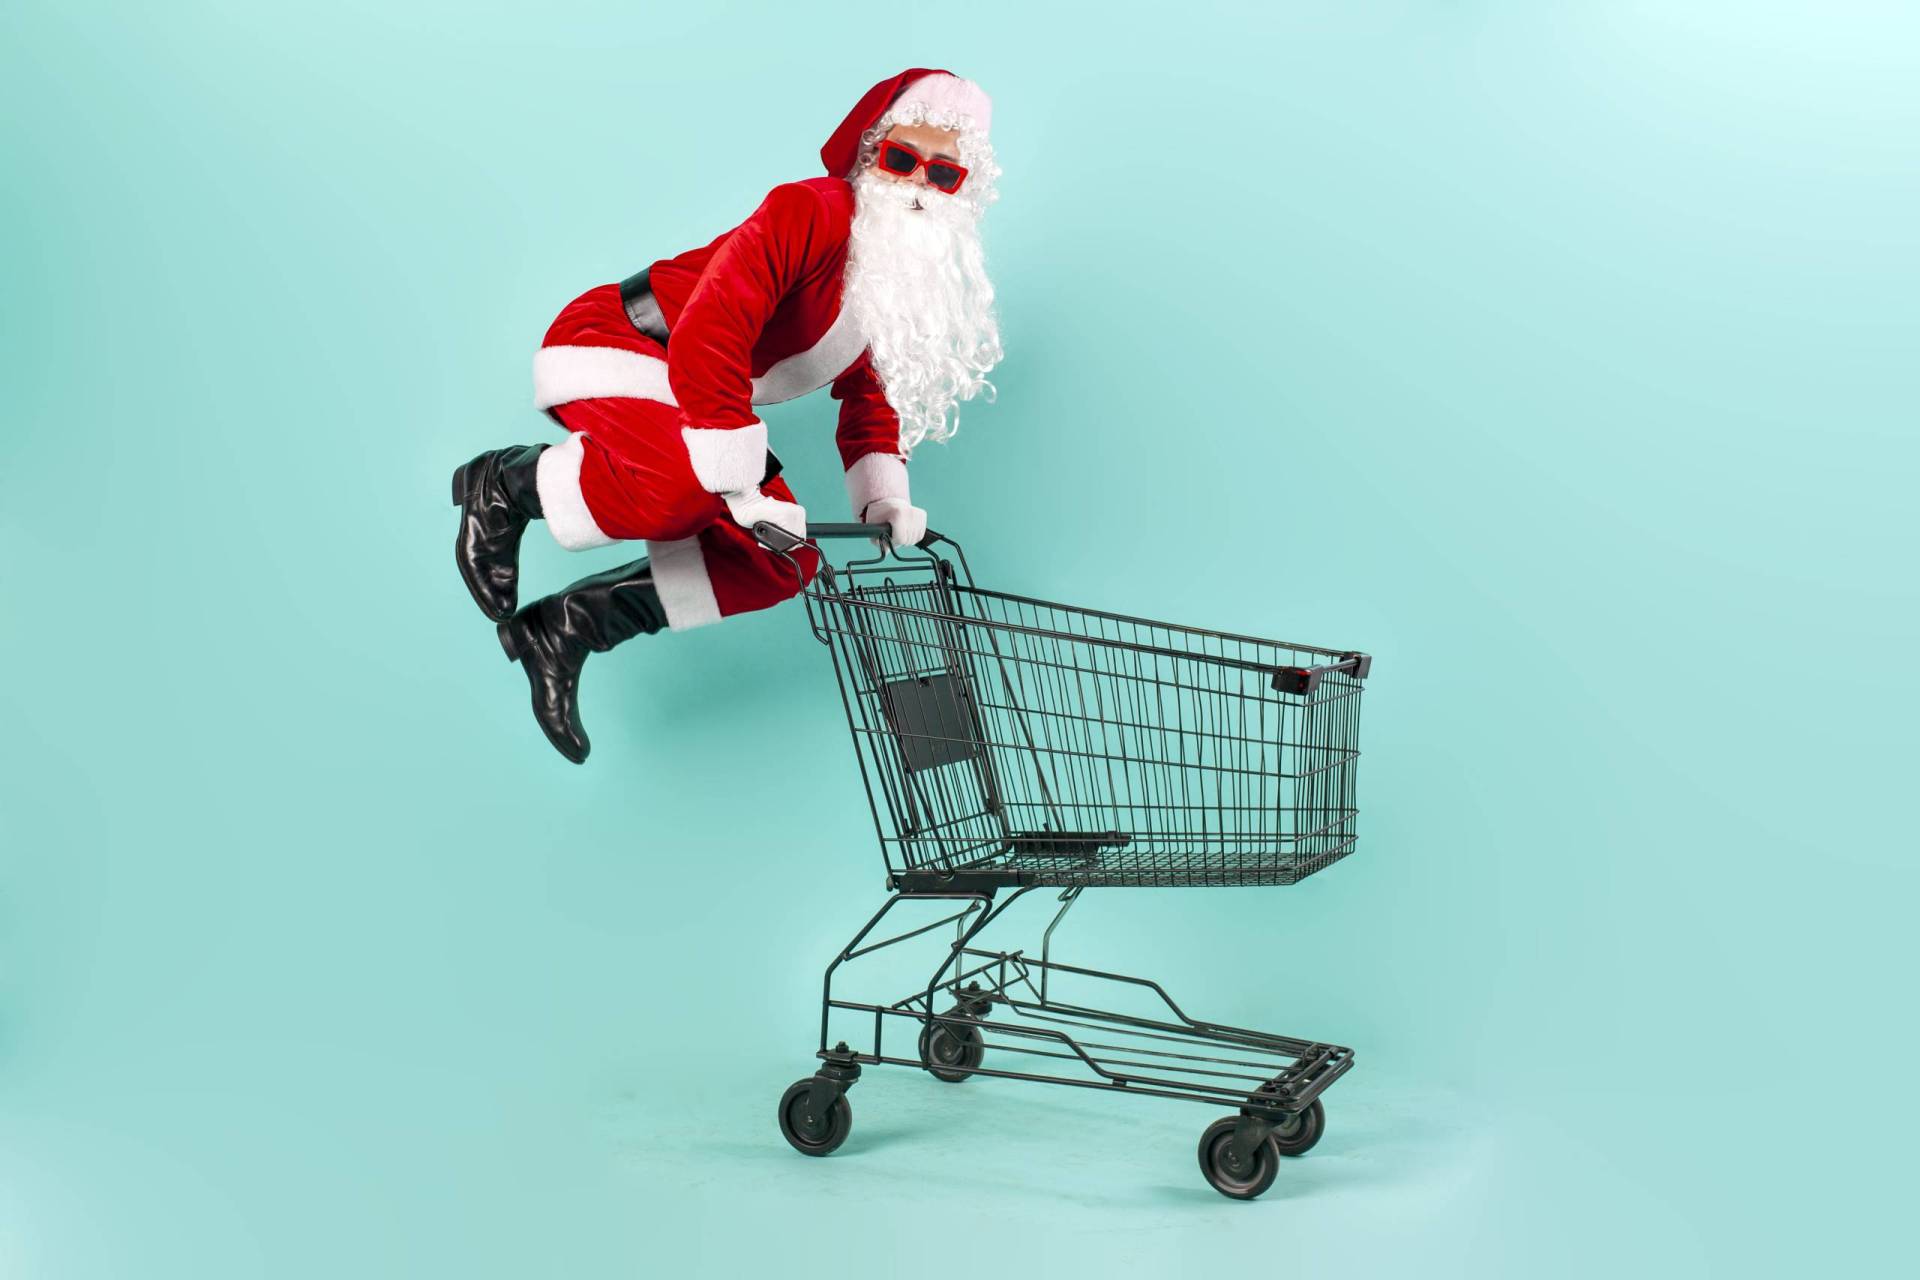 Santa Claus in sunglasses jumps in the air behind an empty shopping cart.